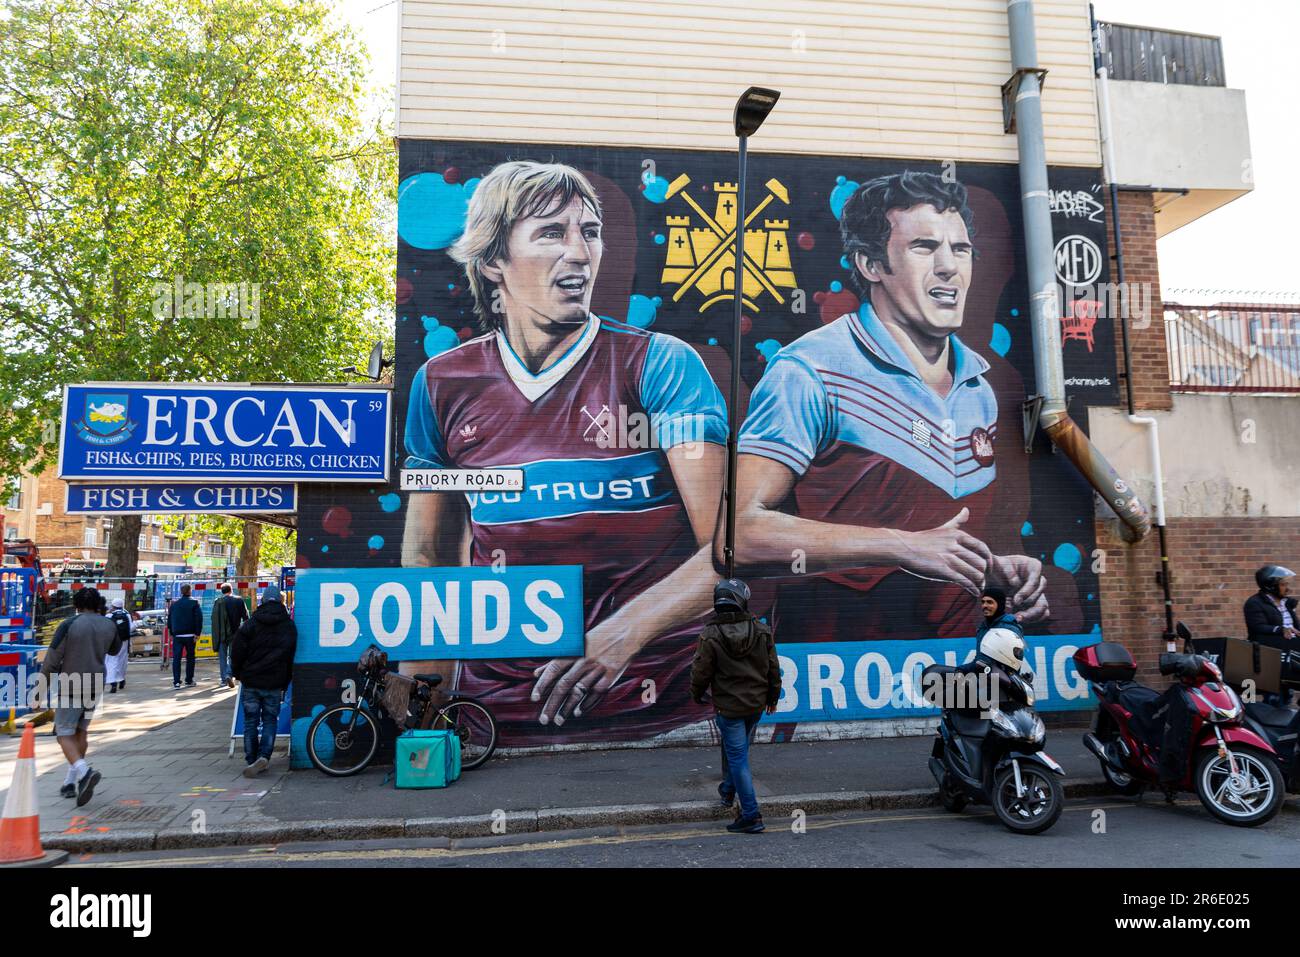 Large mural street art painting of Billy Bonds and Trevor Brooking in Newham near the old West Ham Utd football ground Upton Park Stock Photo